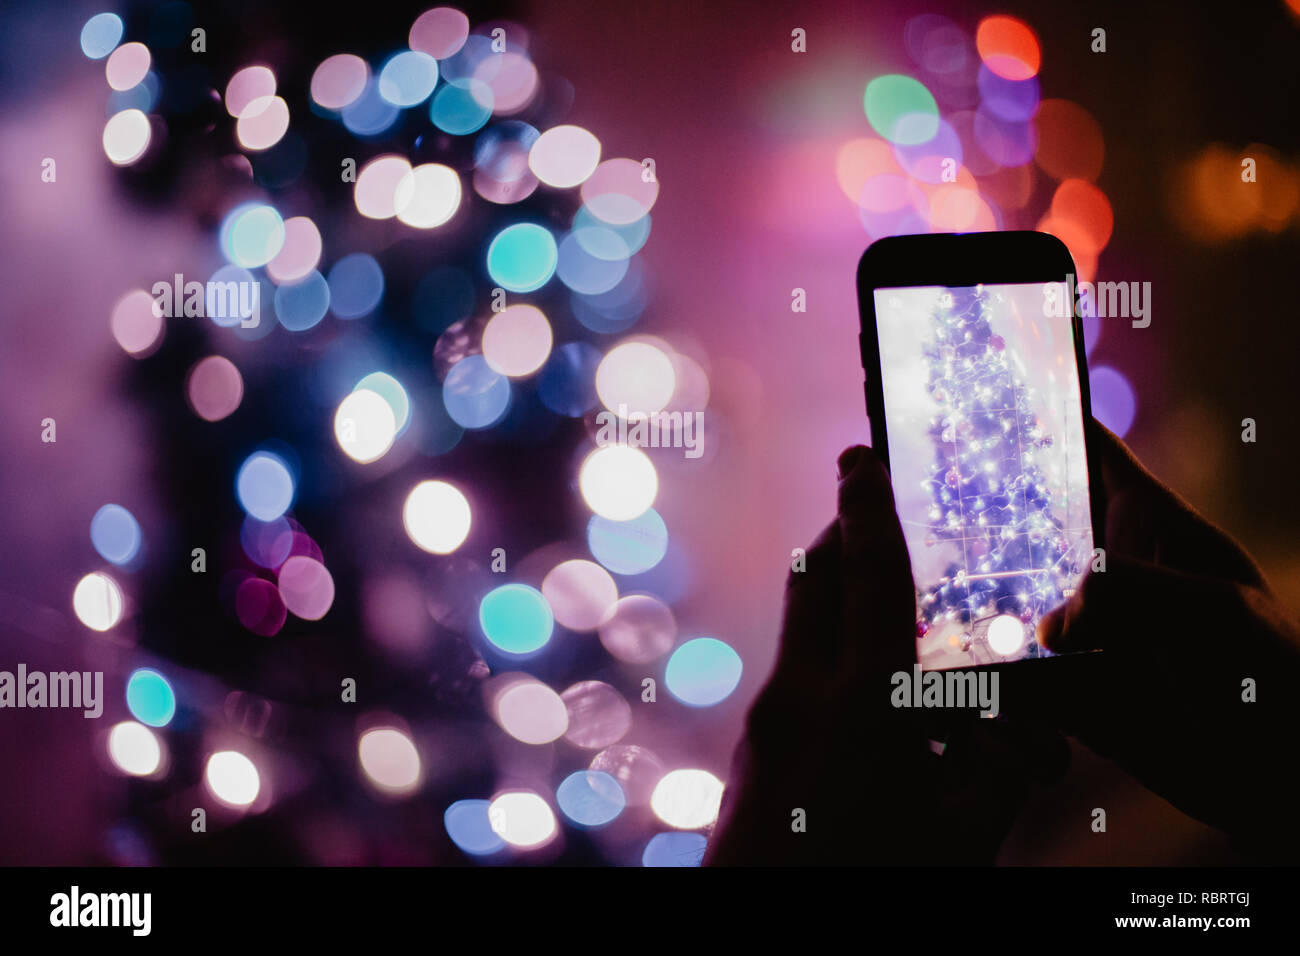 Man holding a phone and taking a picture of the Christmas tree lamps Stock Photo